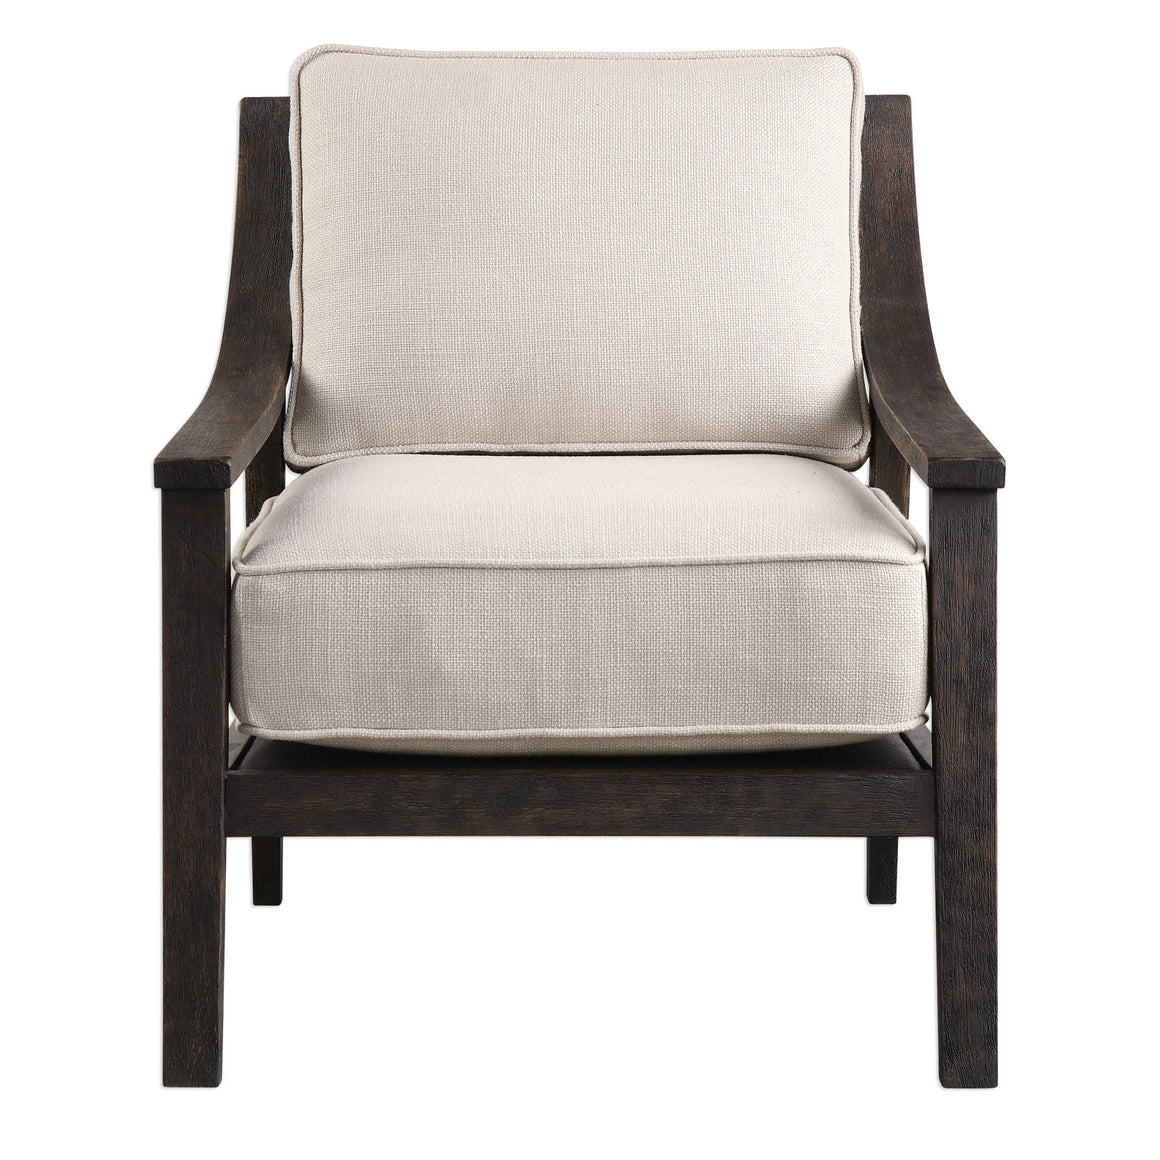 Lyle Rustic Accent Chair - taylor ray decor